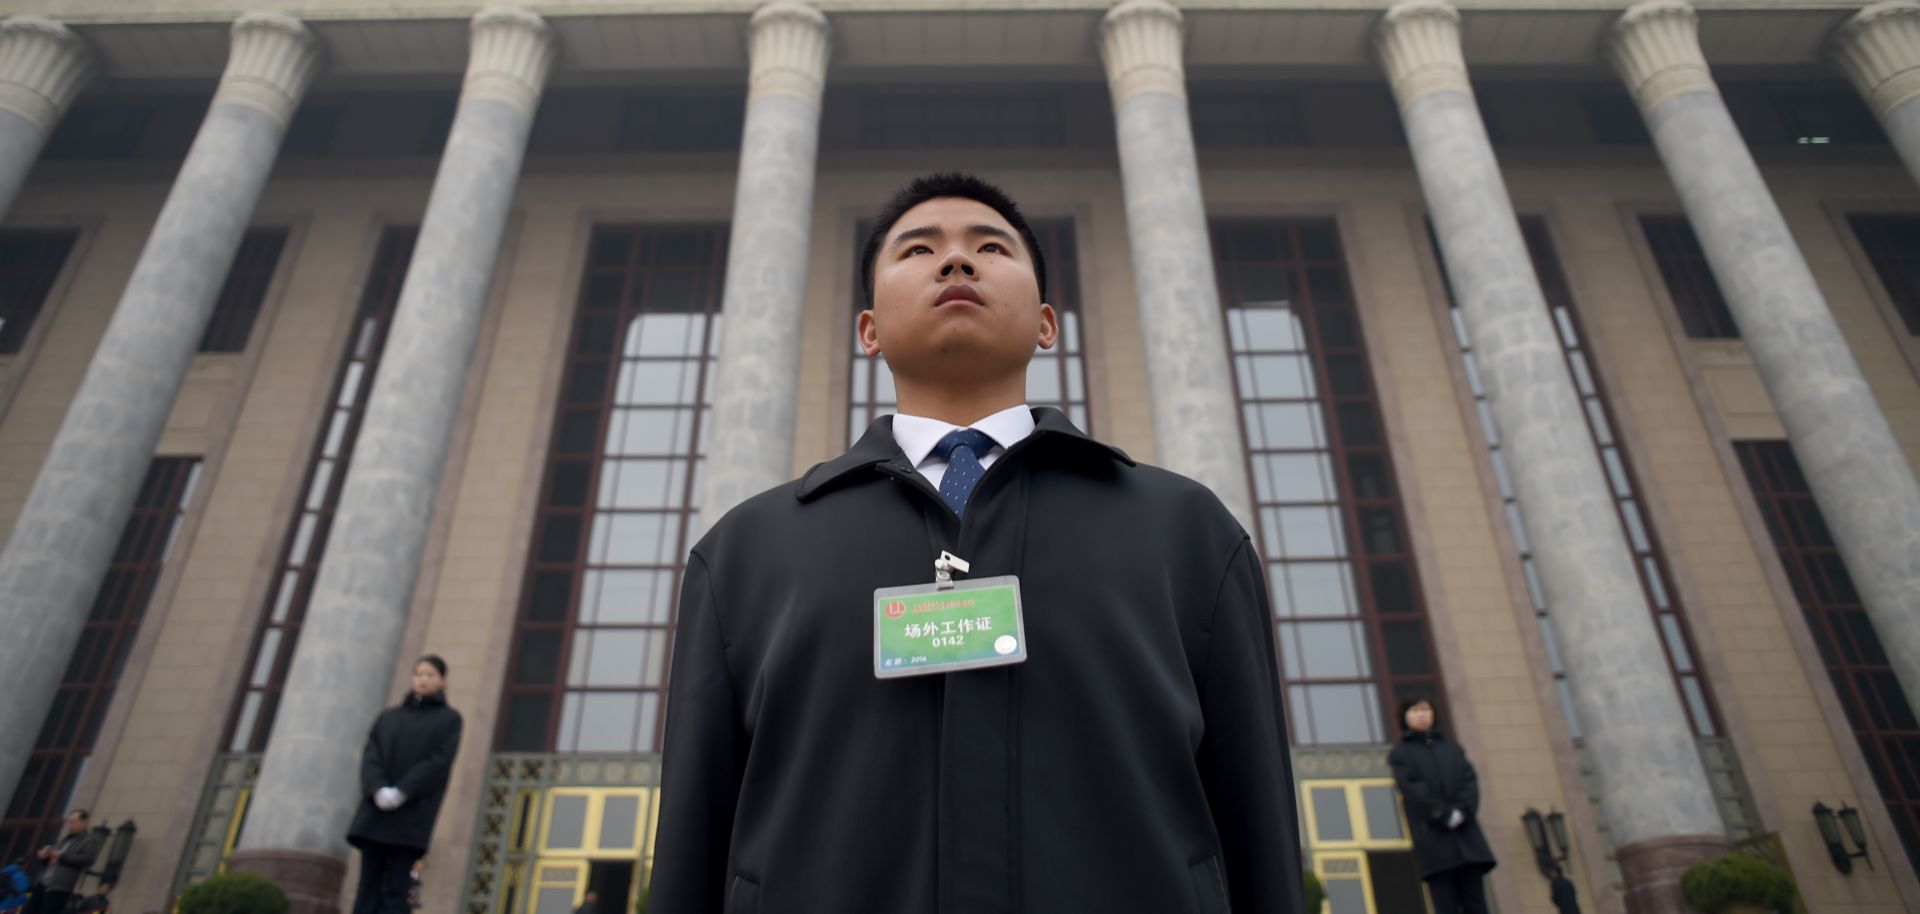 A security guard stands in front of the Great Hall of the People as delegates arrive for a conference in Beijing on March 4, 2016.